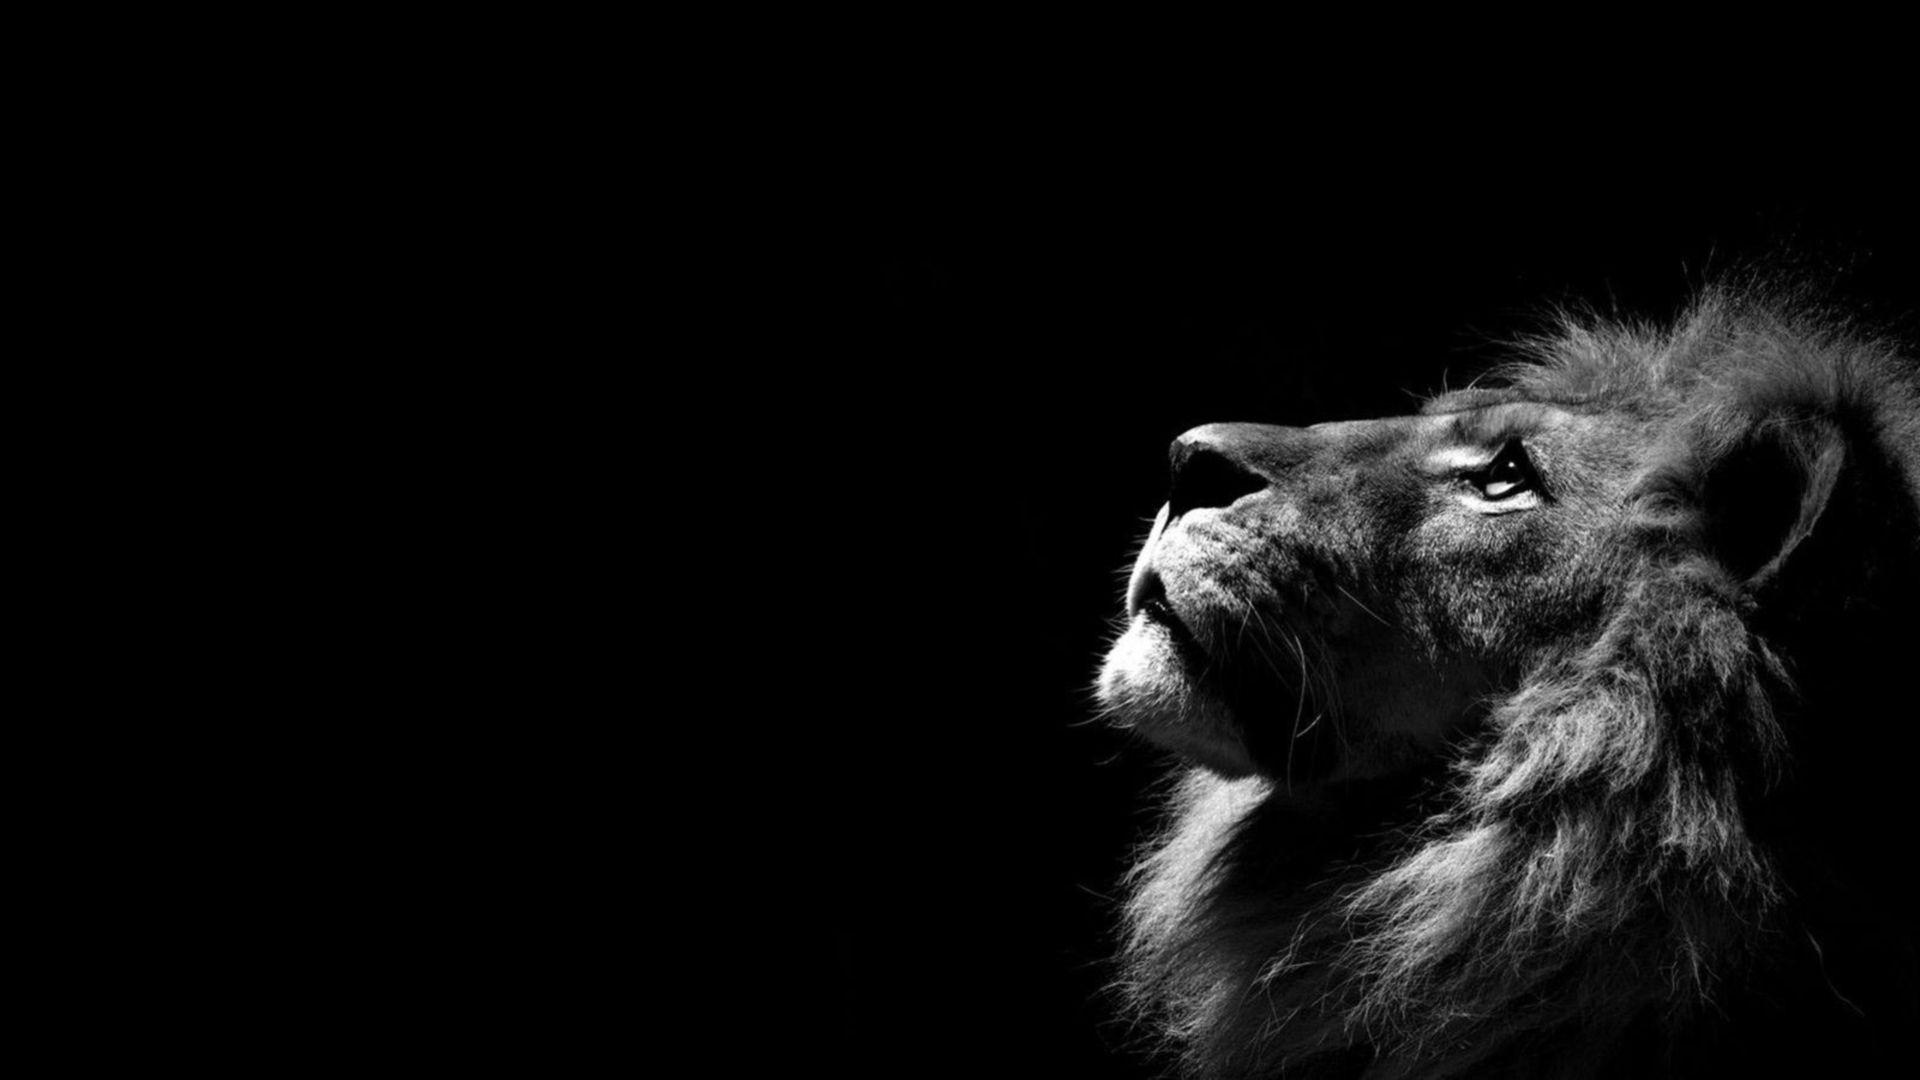 HD Lion Wallpapers 1080p - Wallpaper Cave